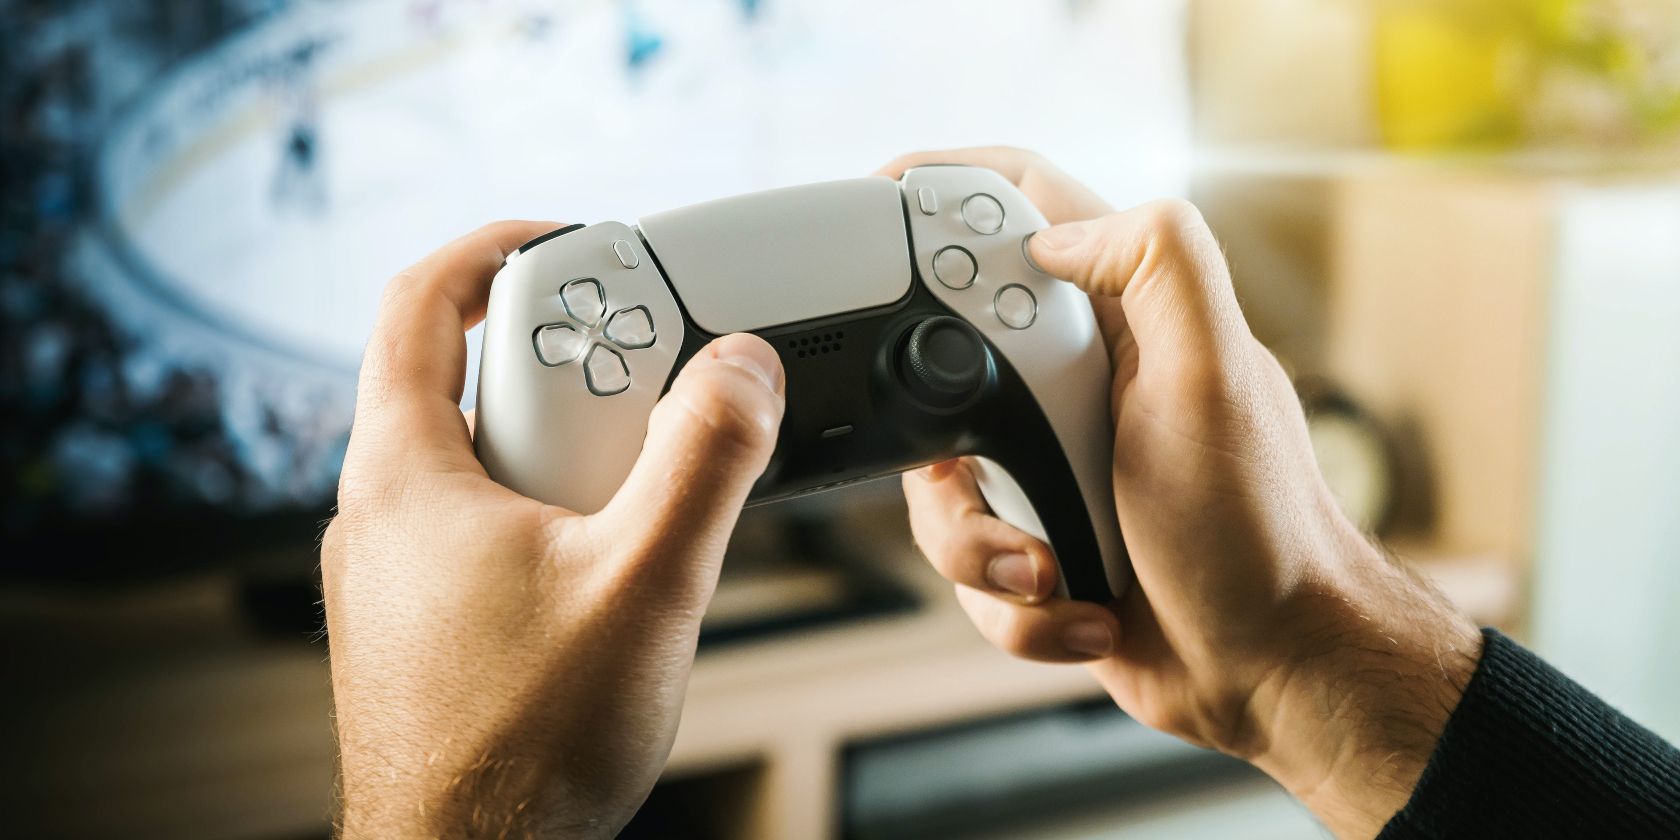 Two hands gripping a PS5 controller with a TV in the background